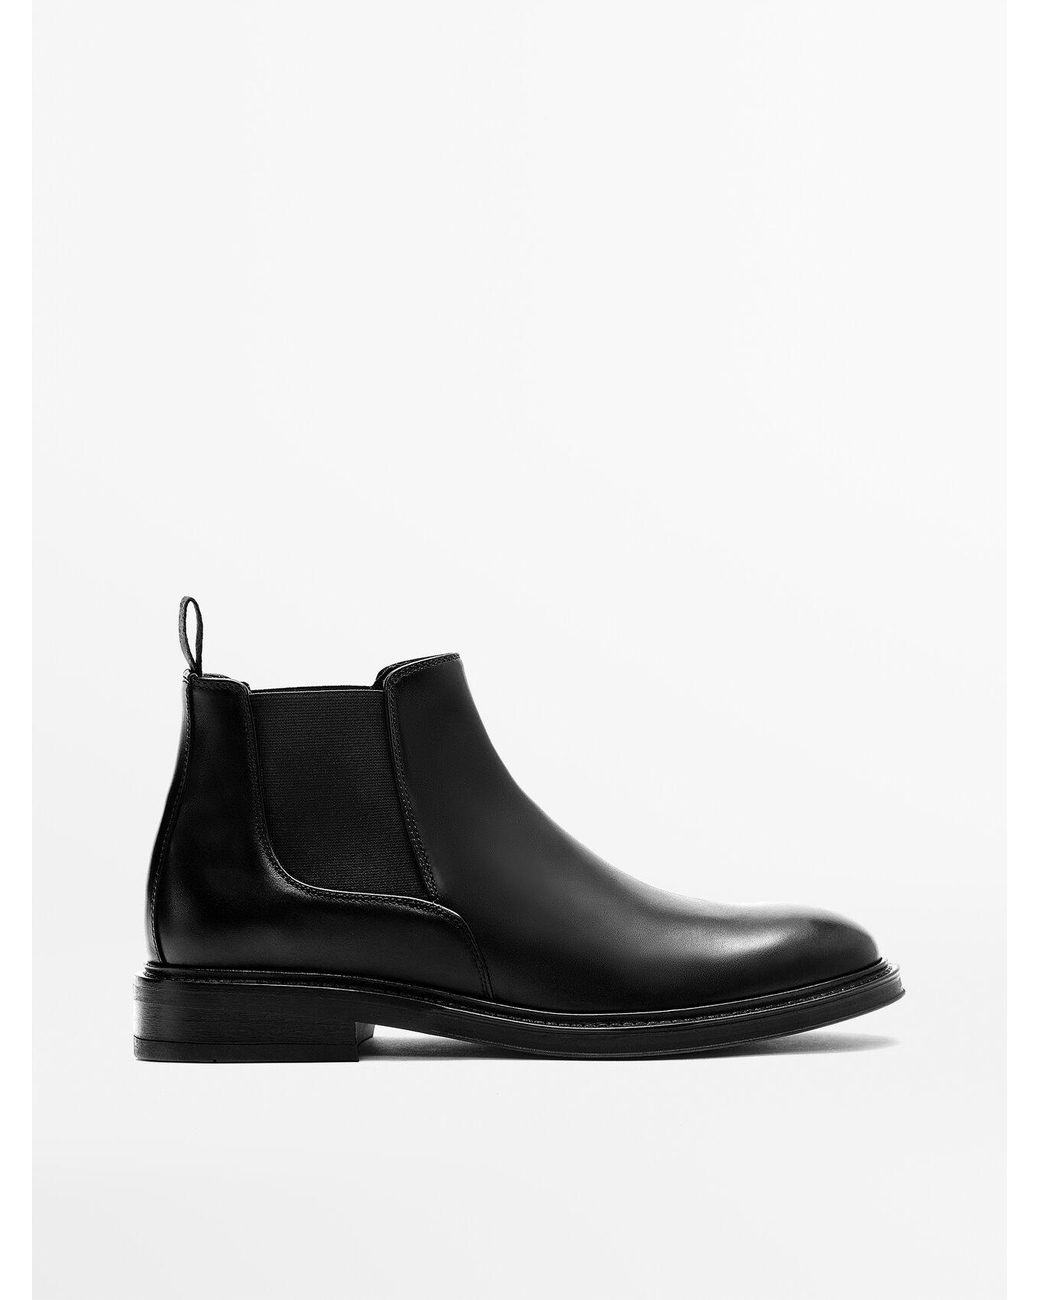 MASSIMO DUTTI Black Brushed Leather Chelsea Boots for Men | Lyst